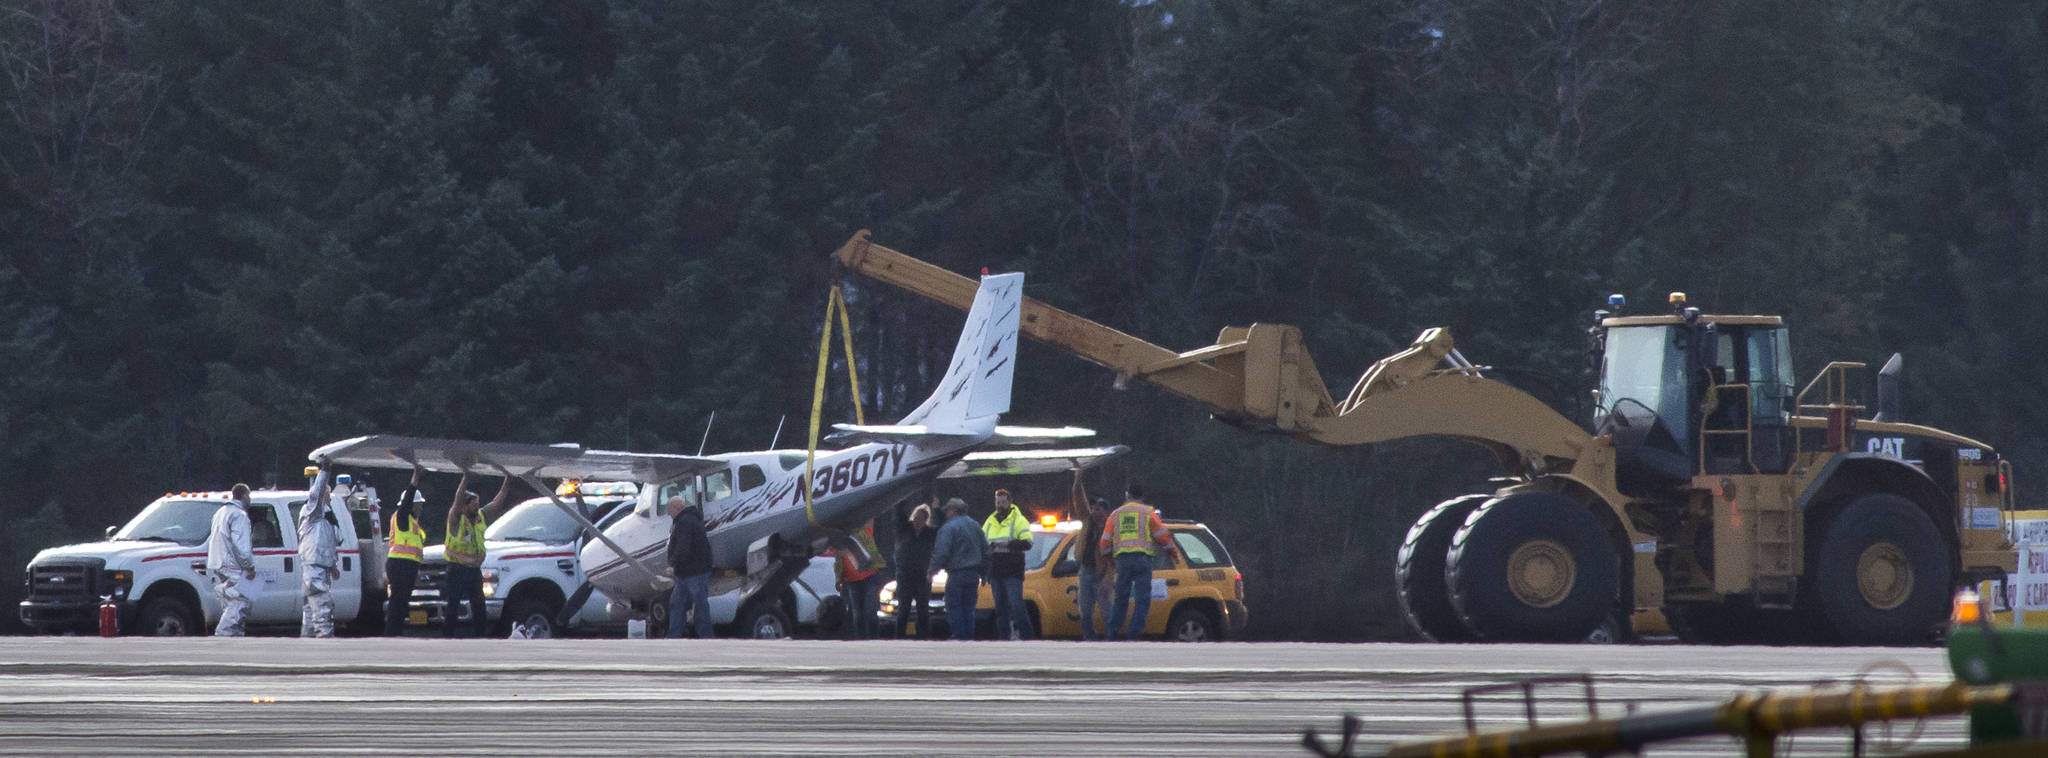 Juneau International Airport firefighters and personnel lift a private aircraft that had landing gear failure while landing at the airport on Sunday, Jan. 14, 2018. (Michael Penn | Juneau Empire)